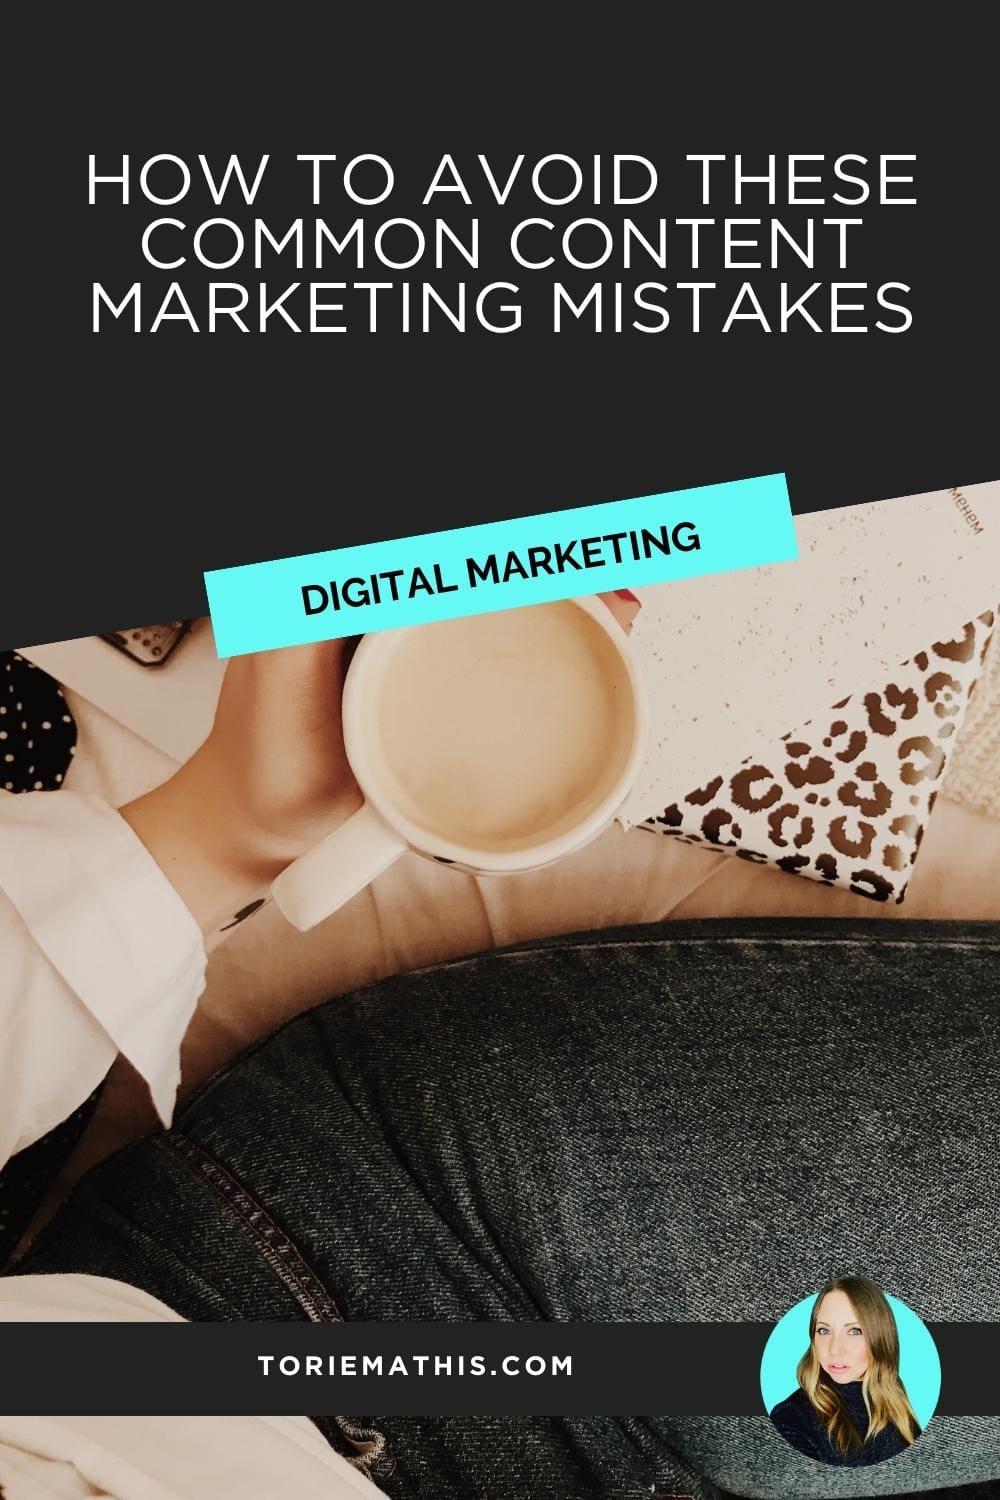 Avoid These Common Content Marketing Mistakes